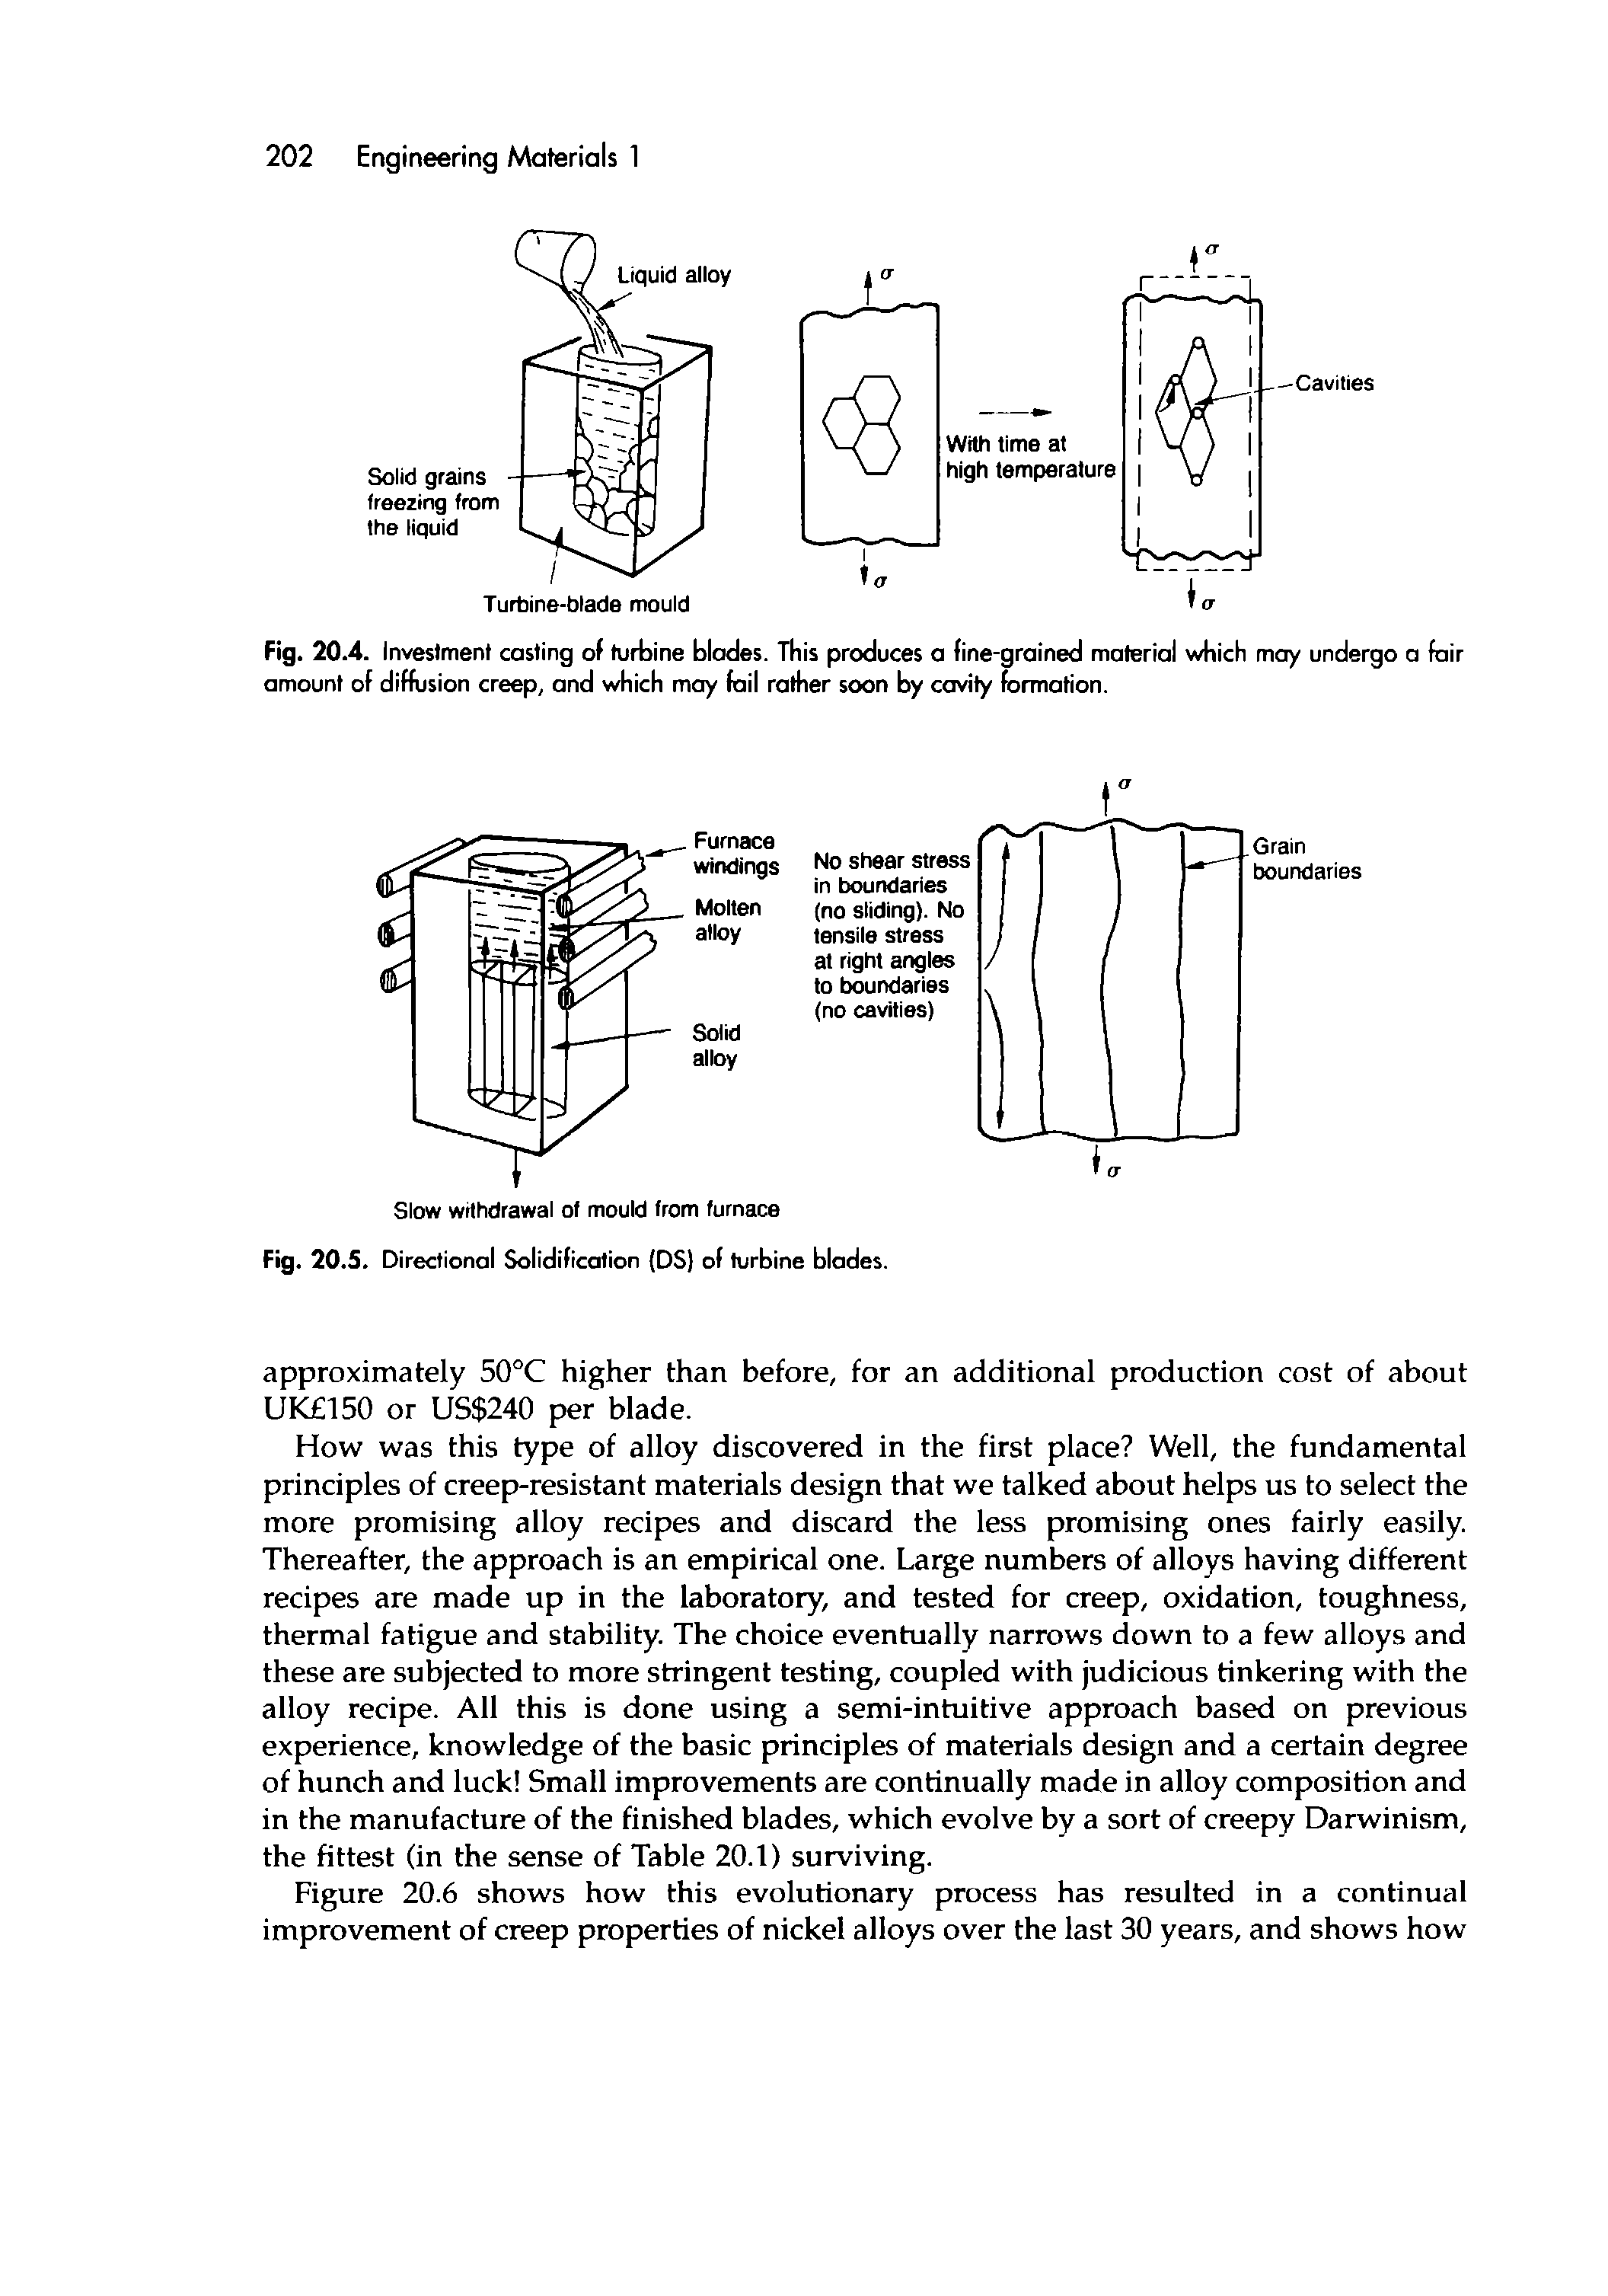 Fig. 20.4. Investment casting of turbine blades. This produces a fine-grained material which may undergo a fair amount of diffusion creep, and which may fail rather soon by cavity formation.